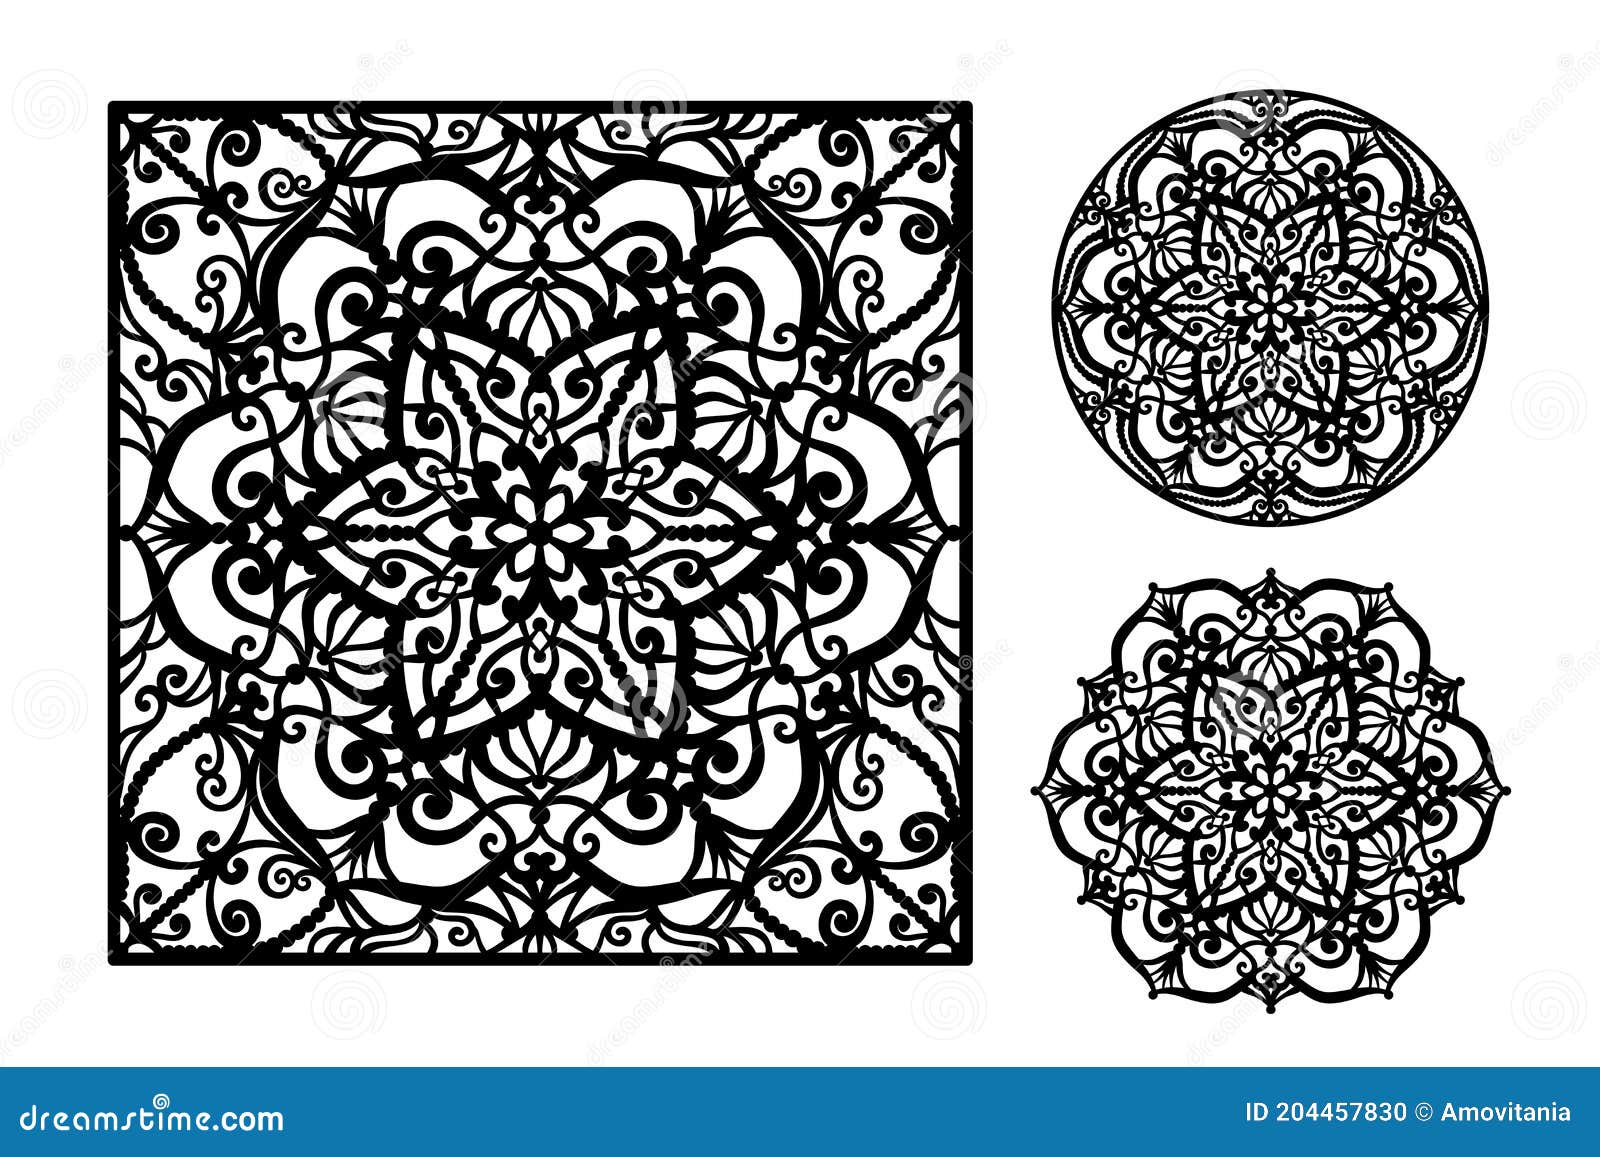 Mandala Coloring Page Flower Design Element for Adult Color Book Stock  Vector - Illustration of flower, isolated: 131401227